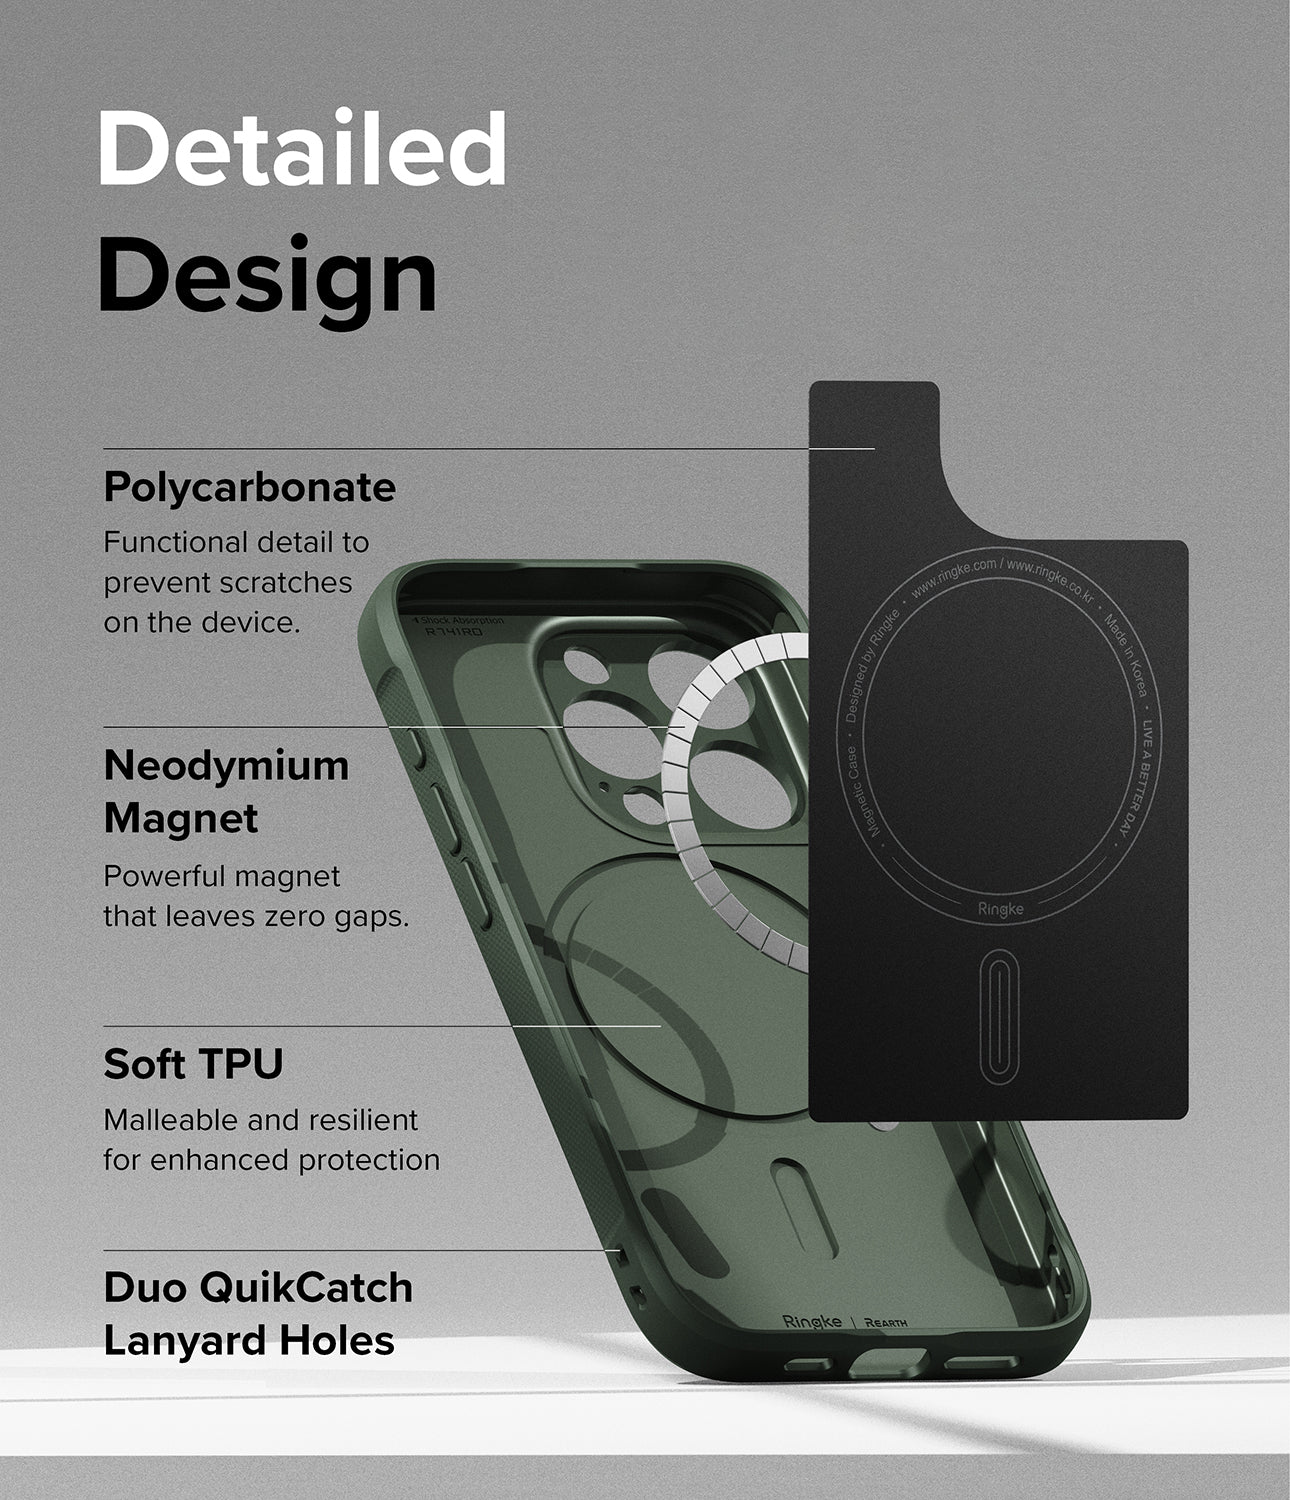 iPhone 15 Pro Case | Onyx Magnetic - Dark Green - Detailed Design. Functional detail to prevent scratches on the device with Polycarbonate. Powerful neodymium magnet that leaves zero gaps. Malleable and resilient for enhanced protection with Soft TPU. Duo QuikCatch Lanyard Holes.